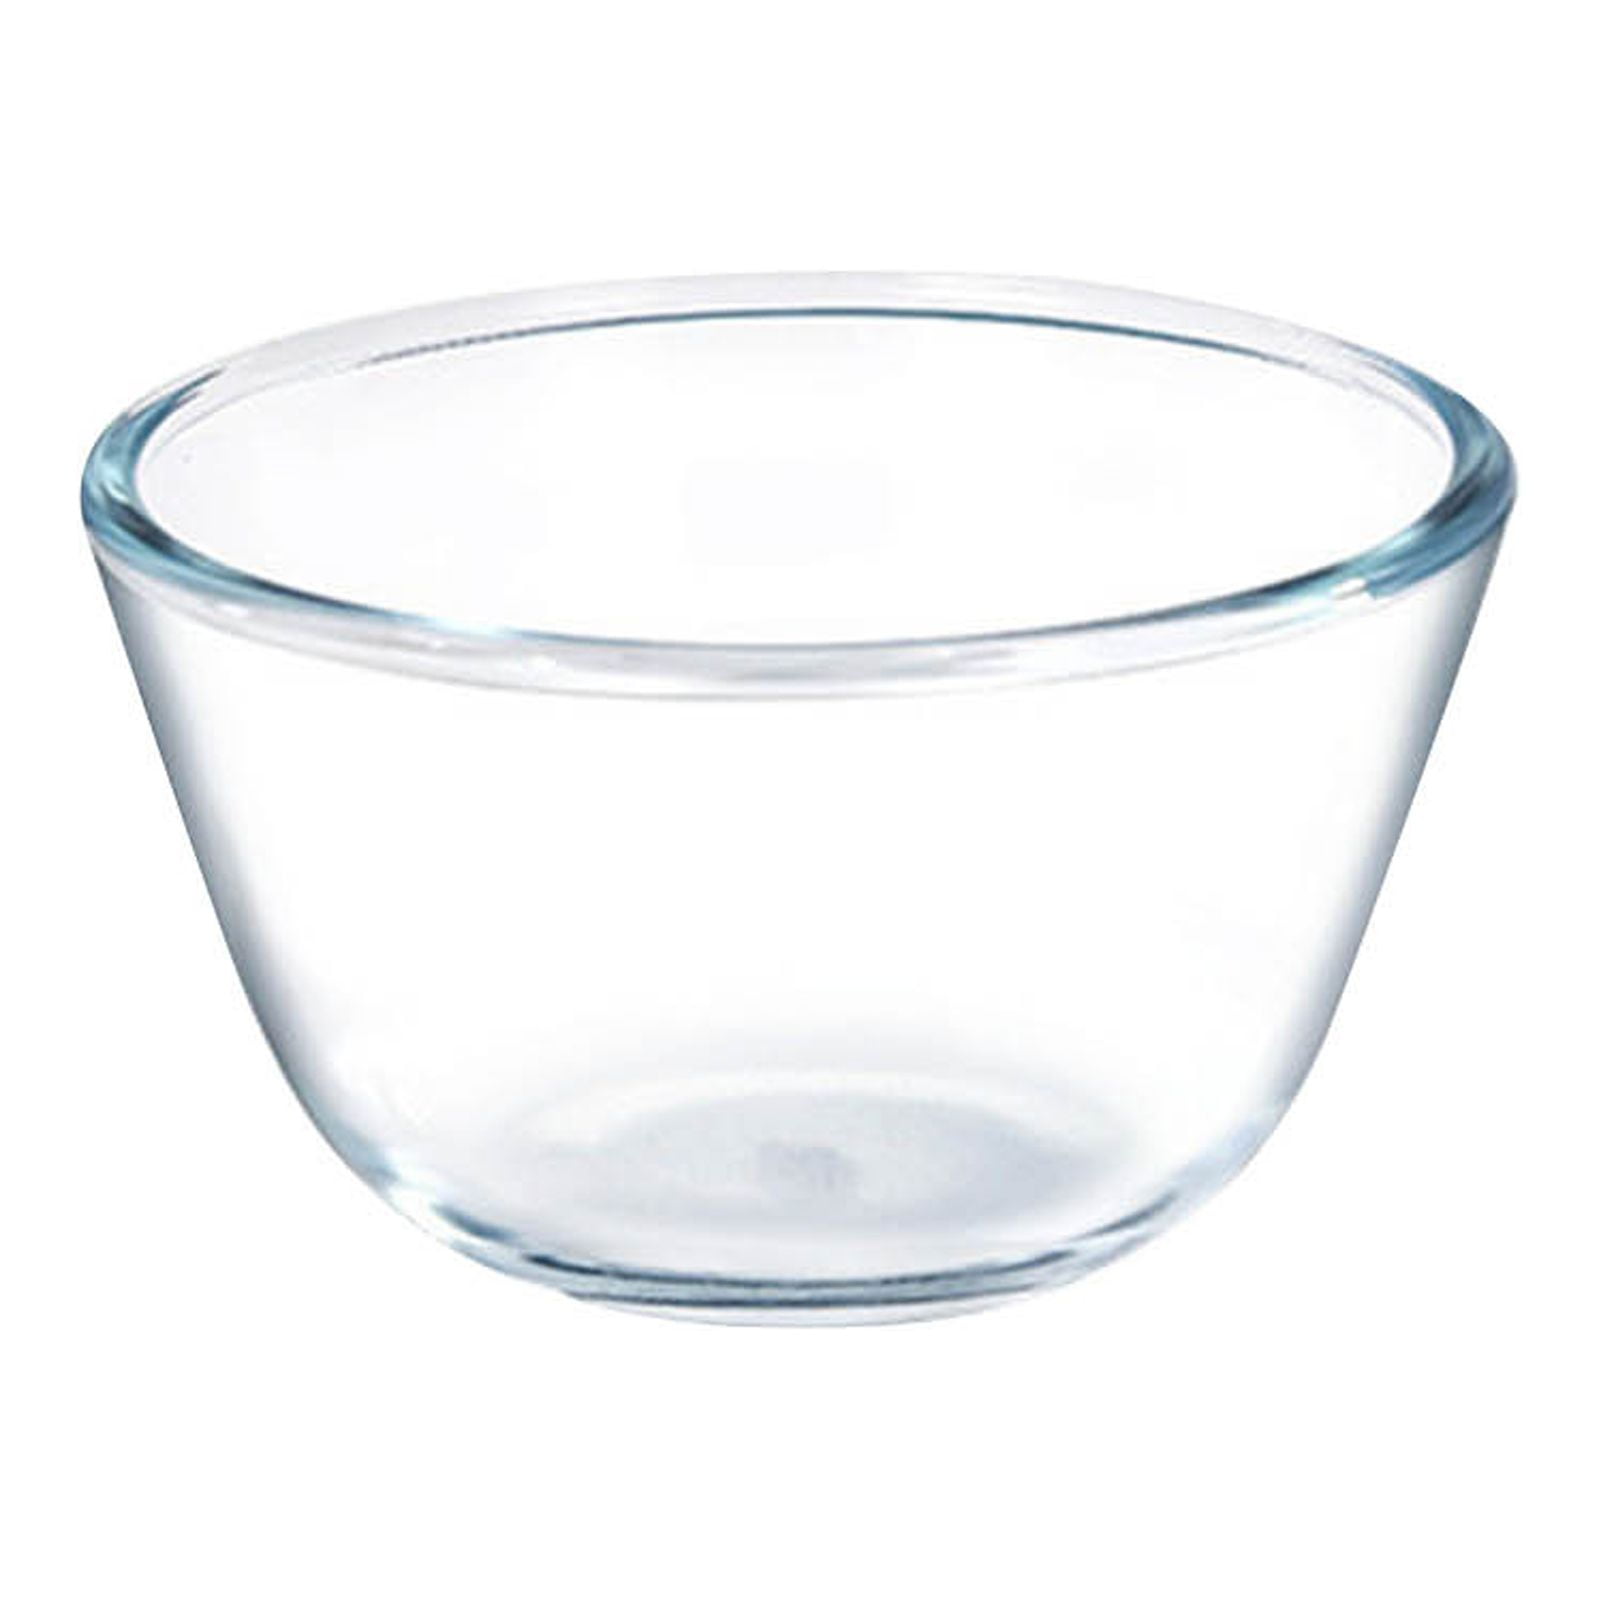 free shipping Tempered glass bowl heatproof 400degree can be in microwave  oven, transparent glass bowl with lid Large